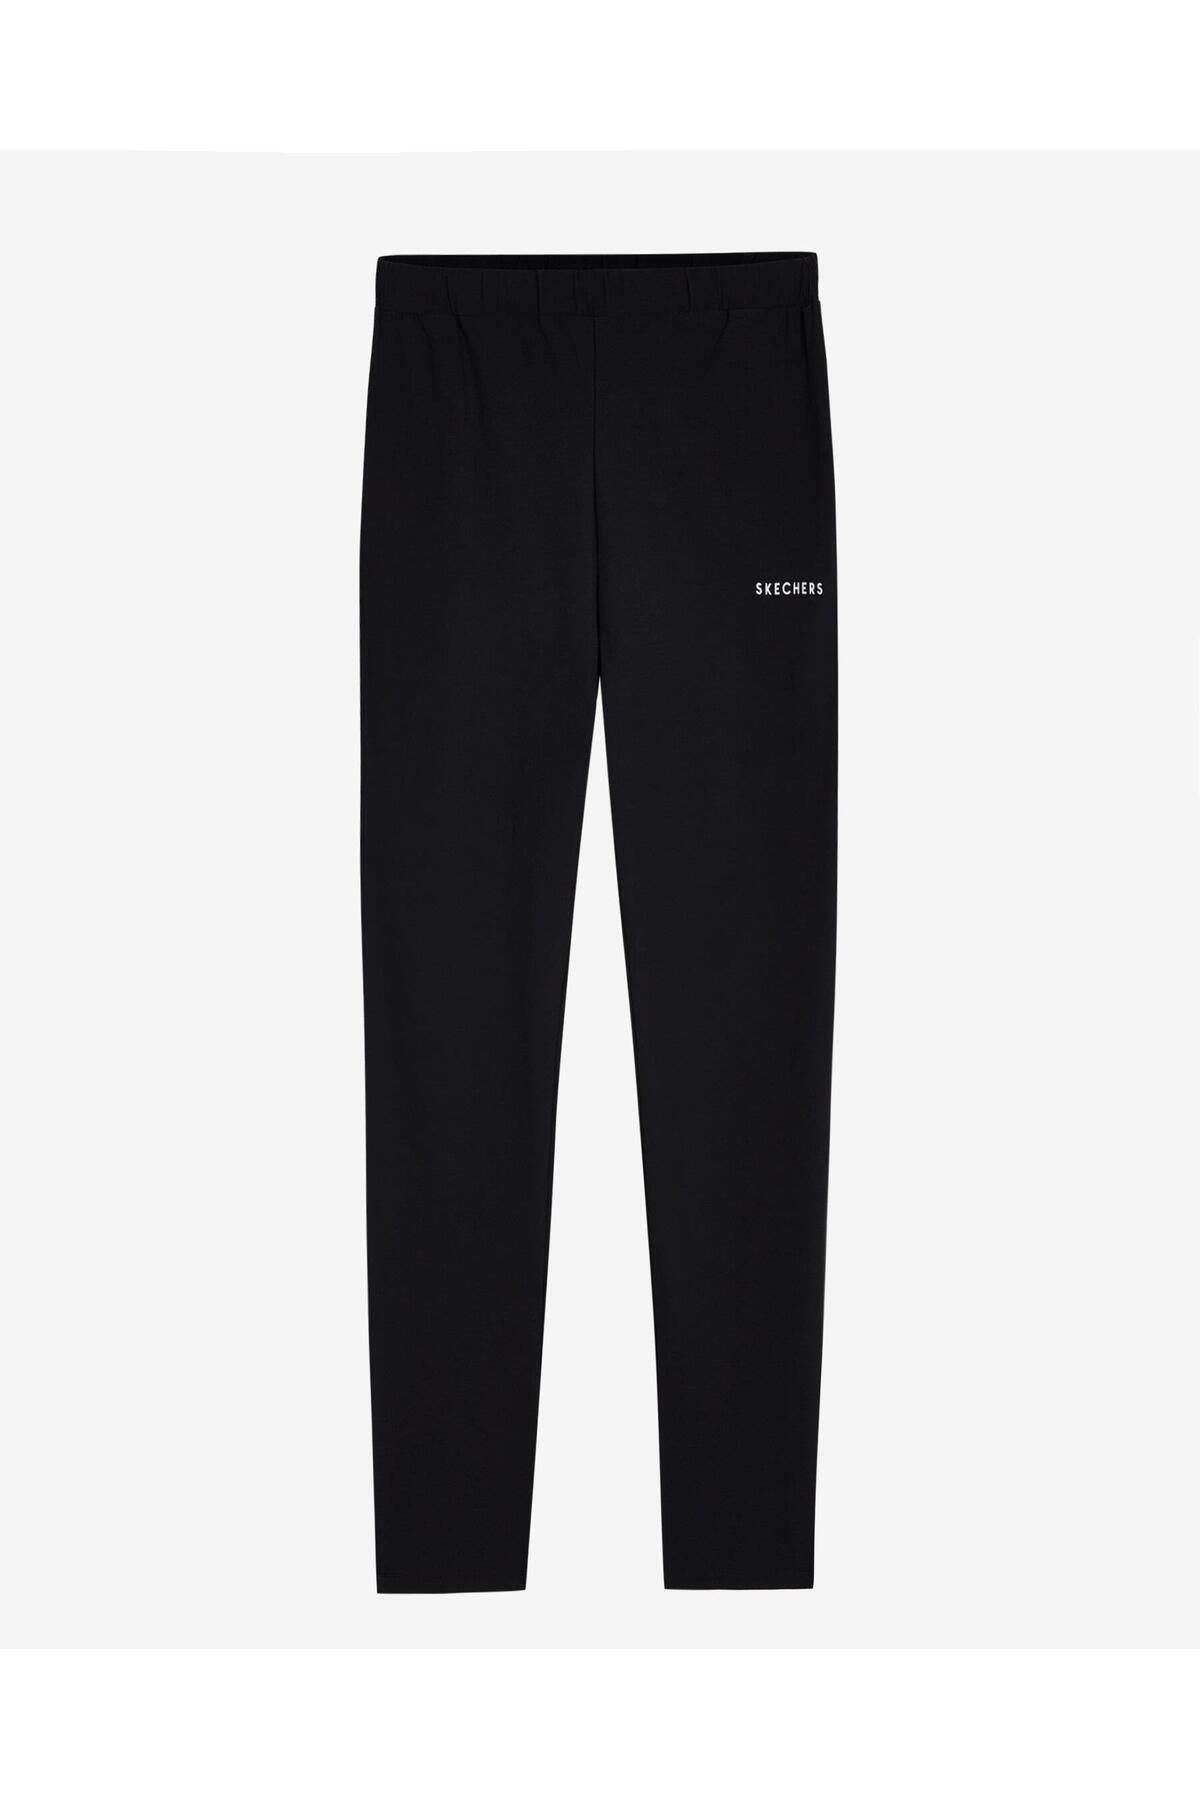 Skechers W Micro Collection Slim Woven Pant